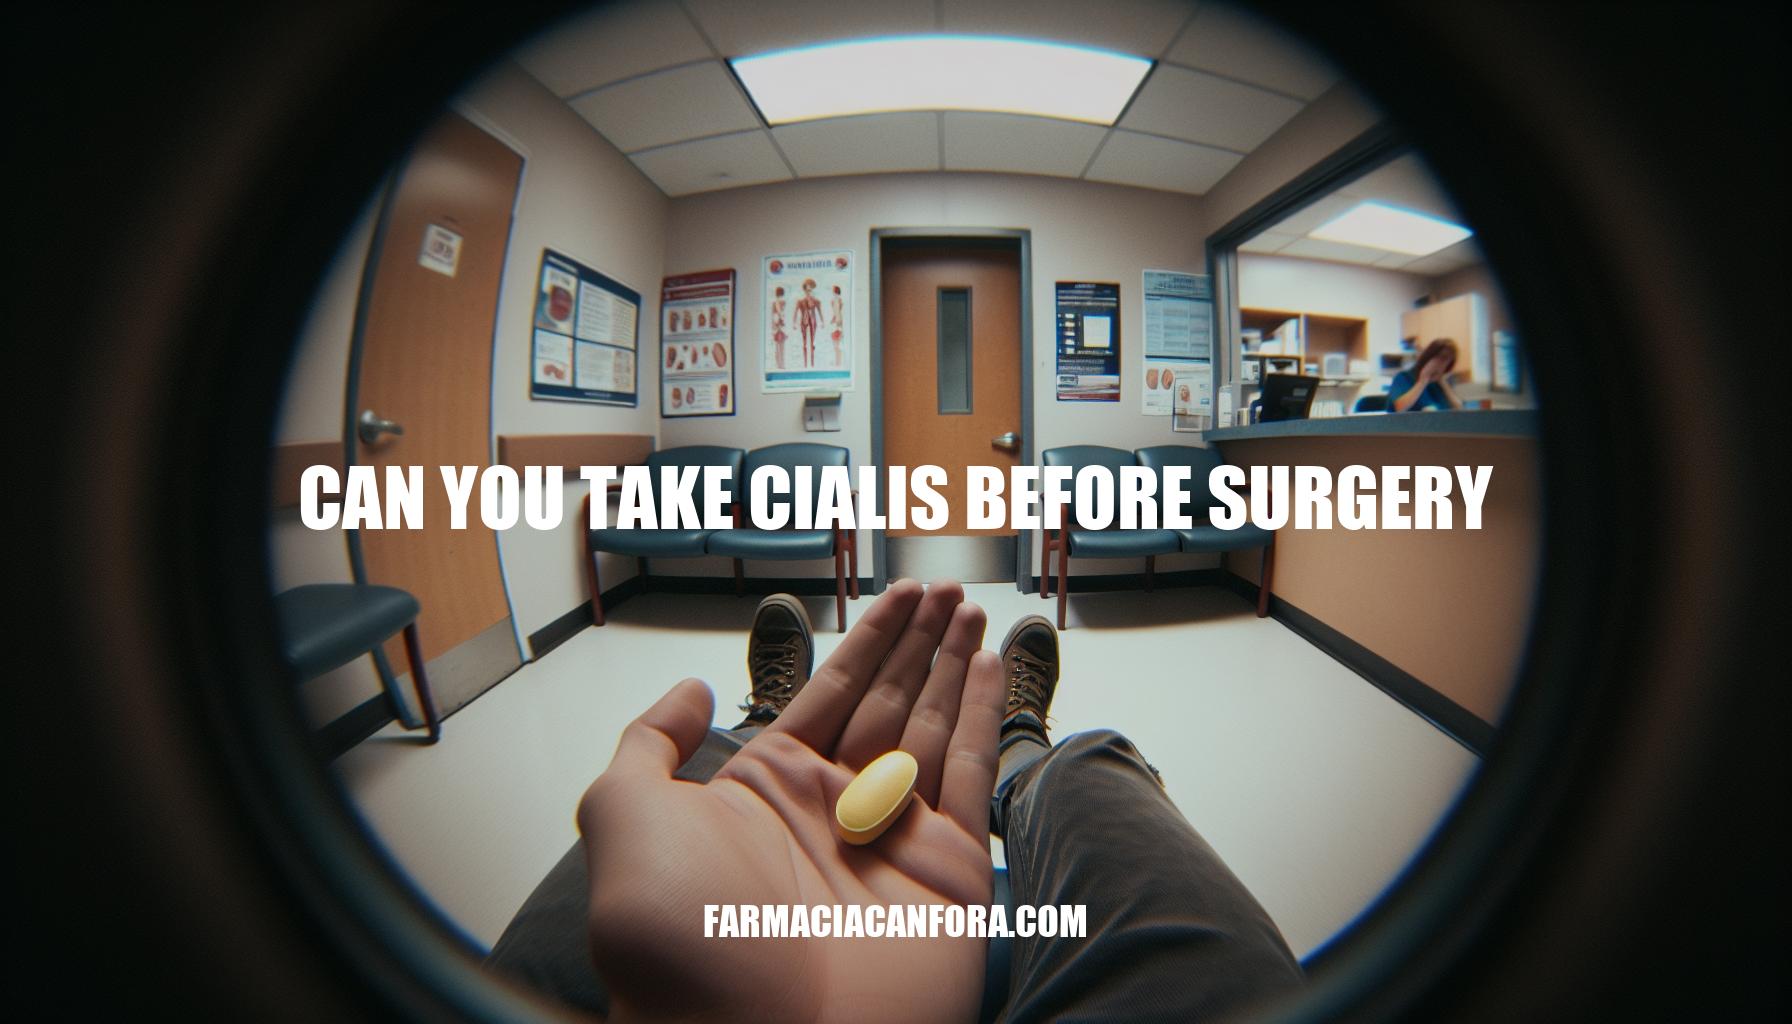 Can You Take Cialis Before Surgery: Benefits and Risks